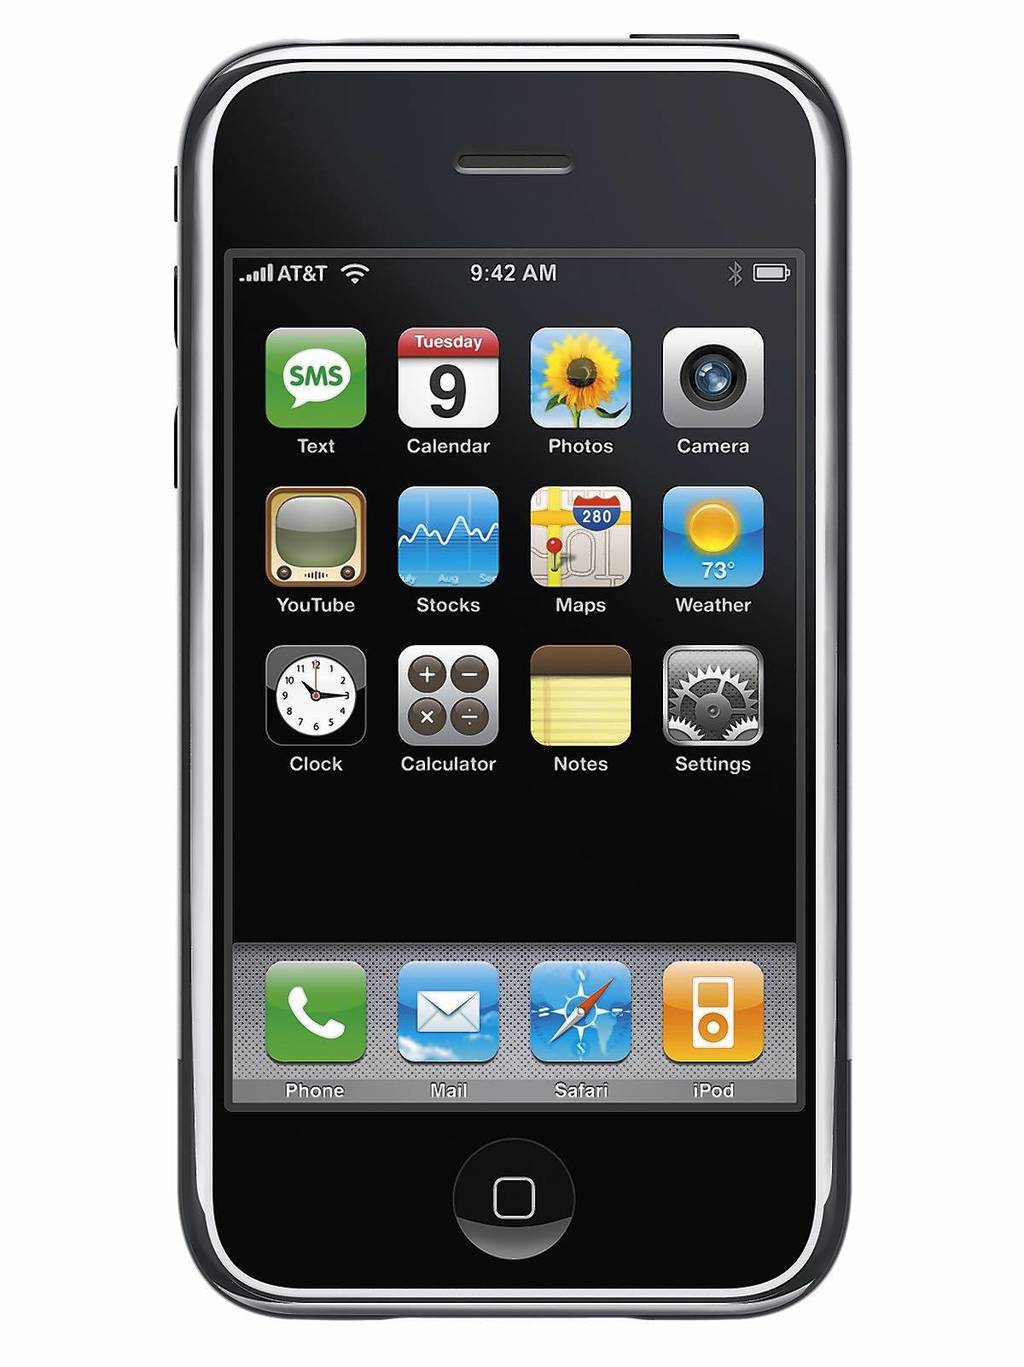 The first iPhone came out in July, 2007.